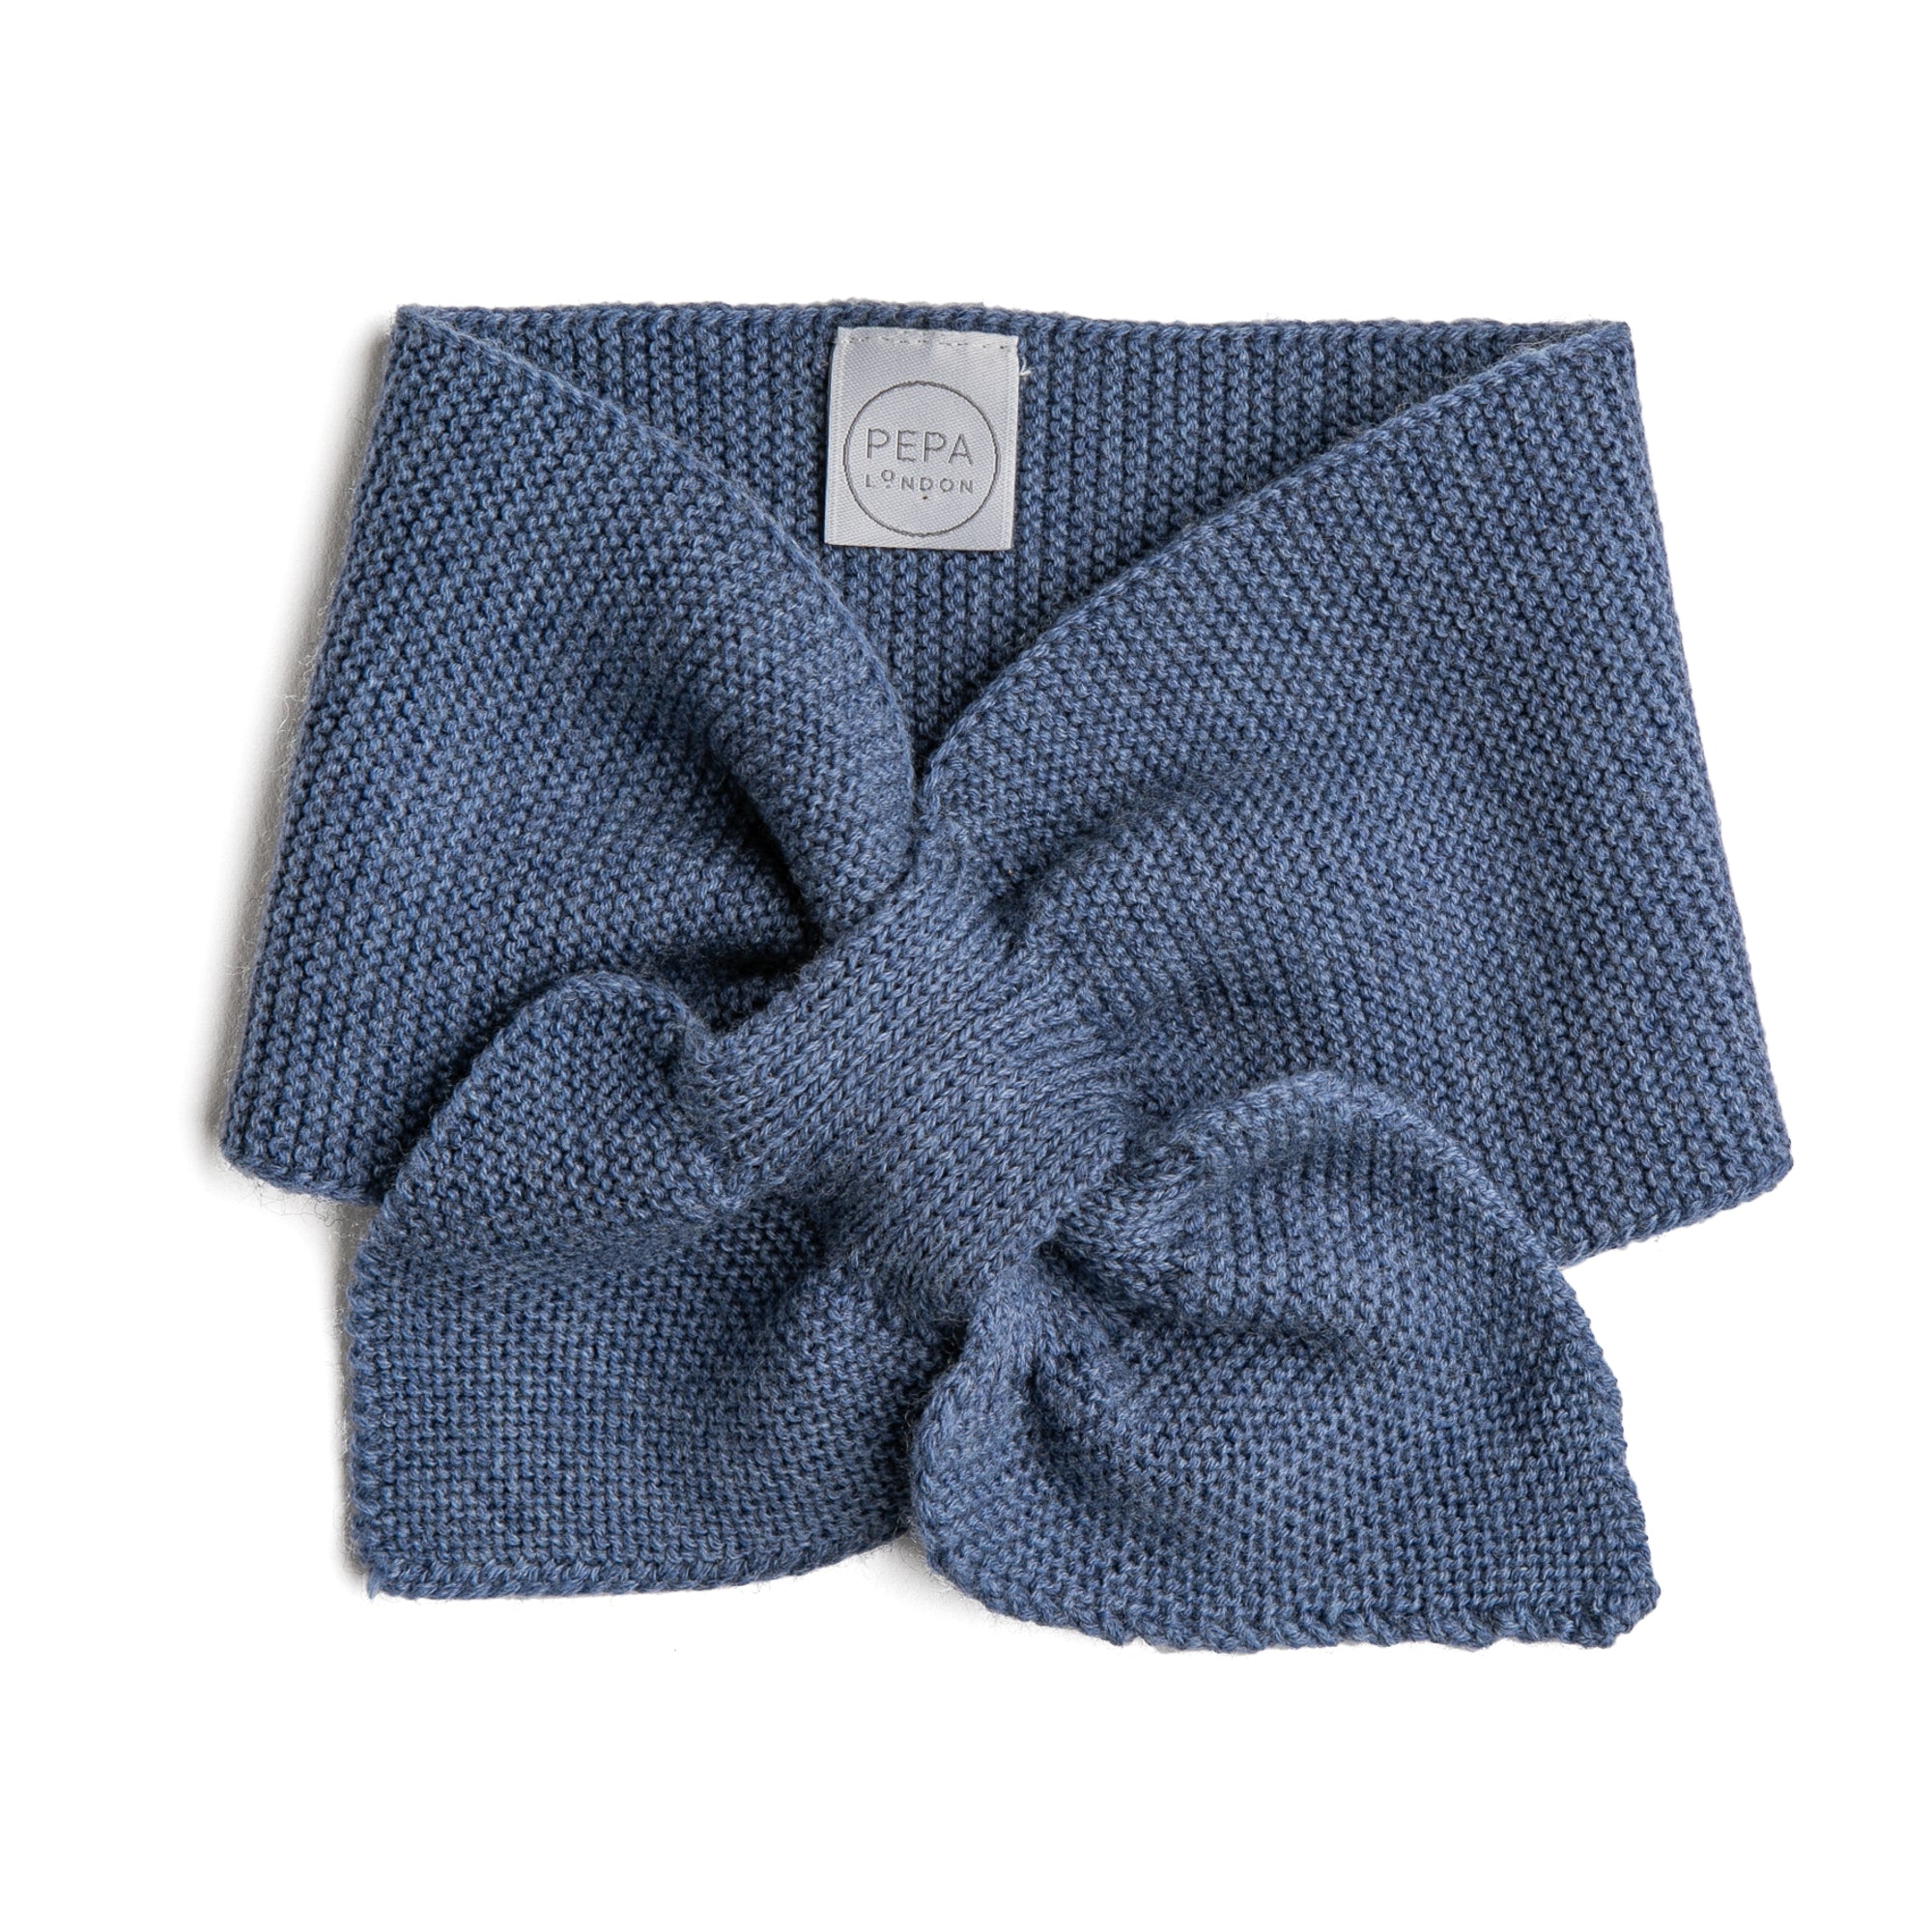 Knitted Merino Wool Winter Scarf in Blue (S-M) Knitted Accessories  from Pepa London